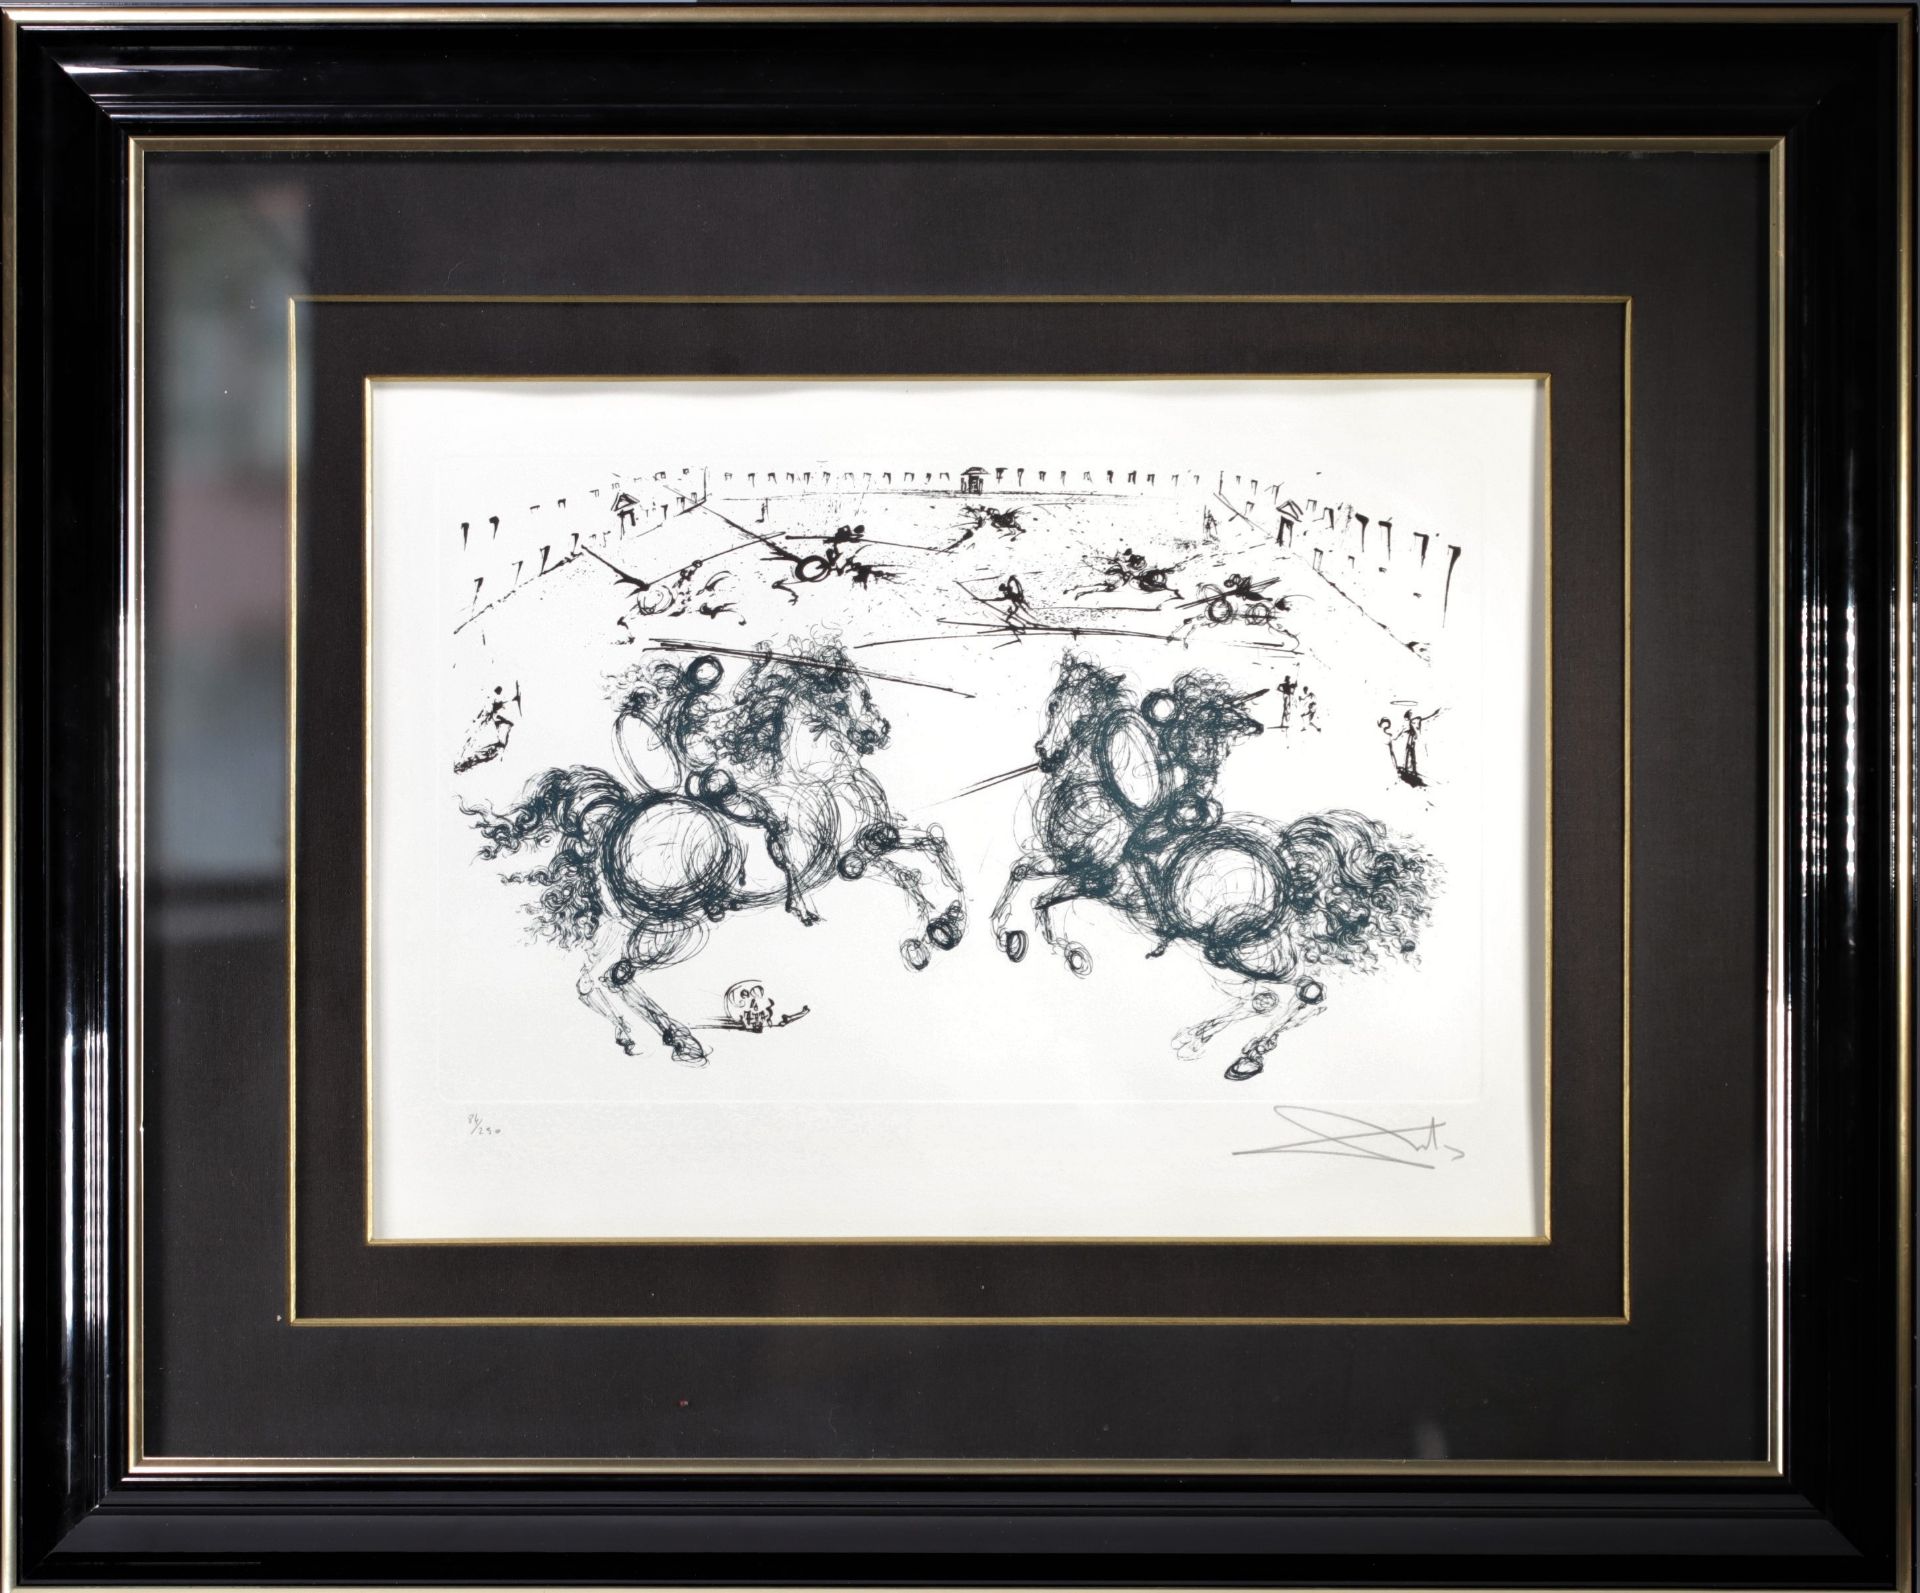 Dali SALVADOR (1904 -1989) "Combat of the Cavaliers" signed in pencil 84/250